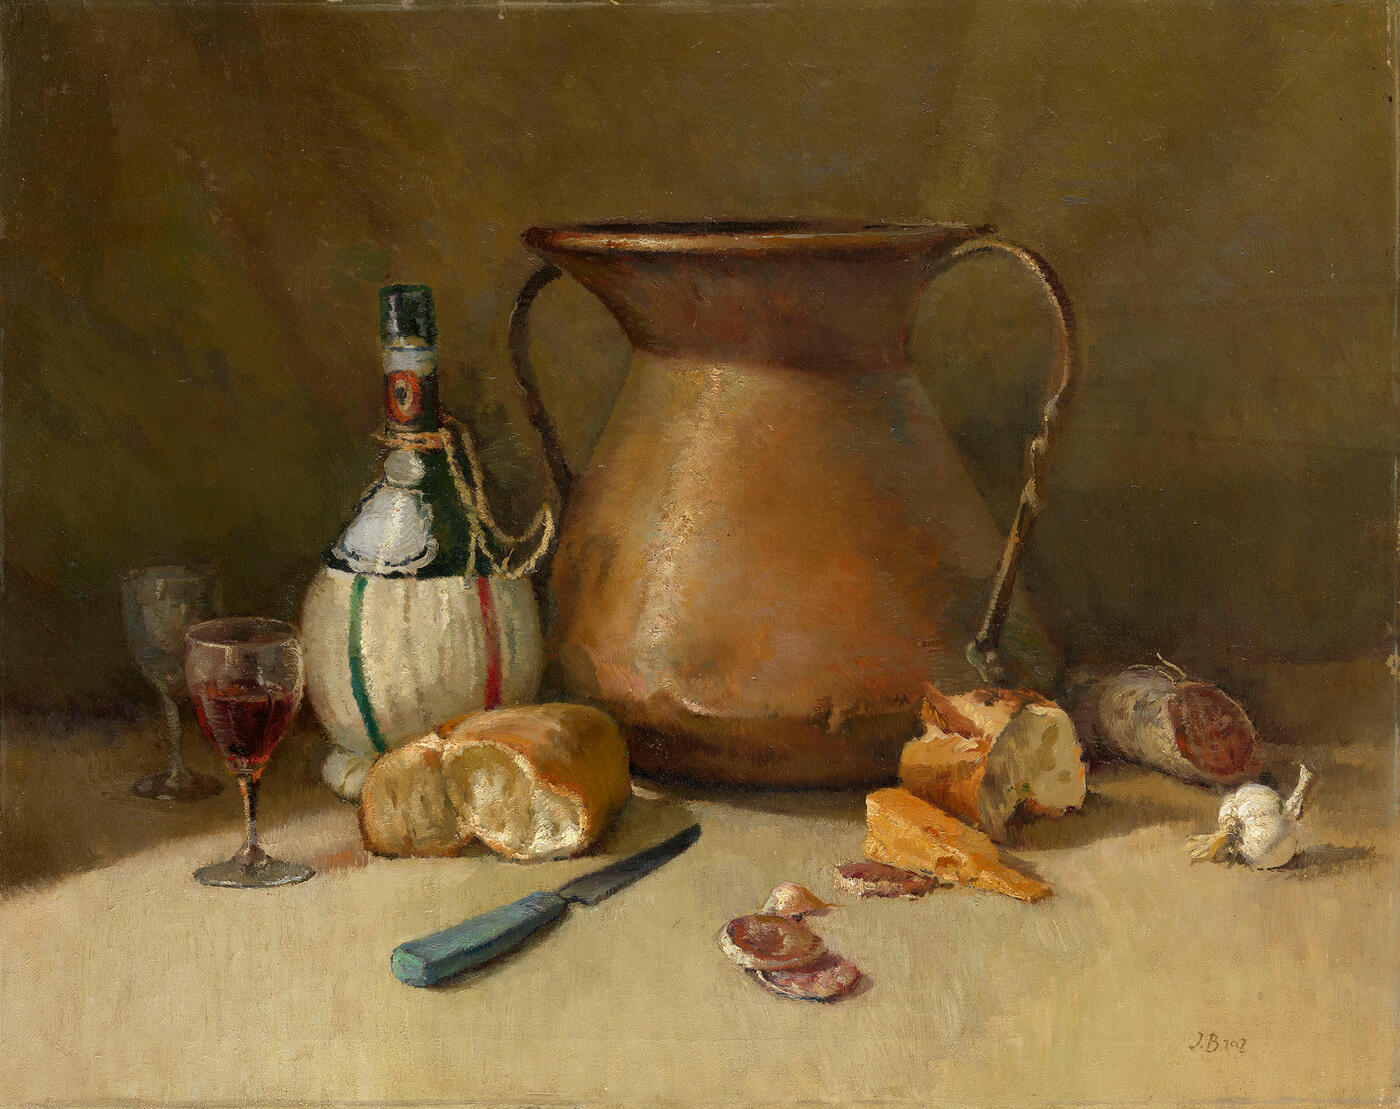 Still Life with Bread and Wine